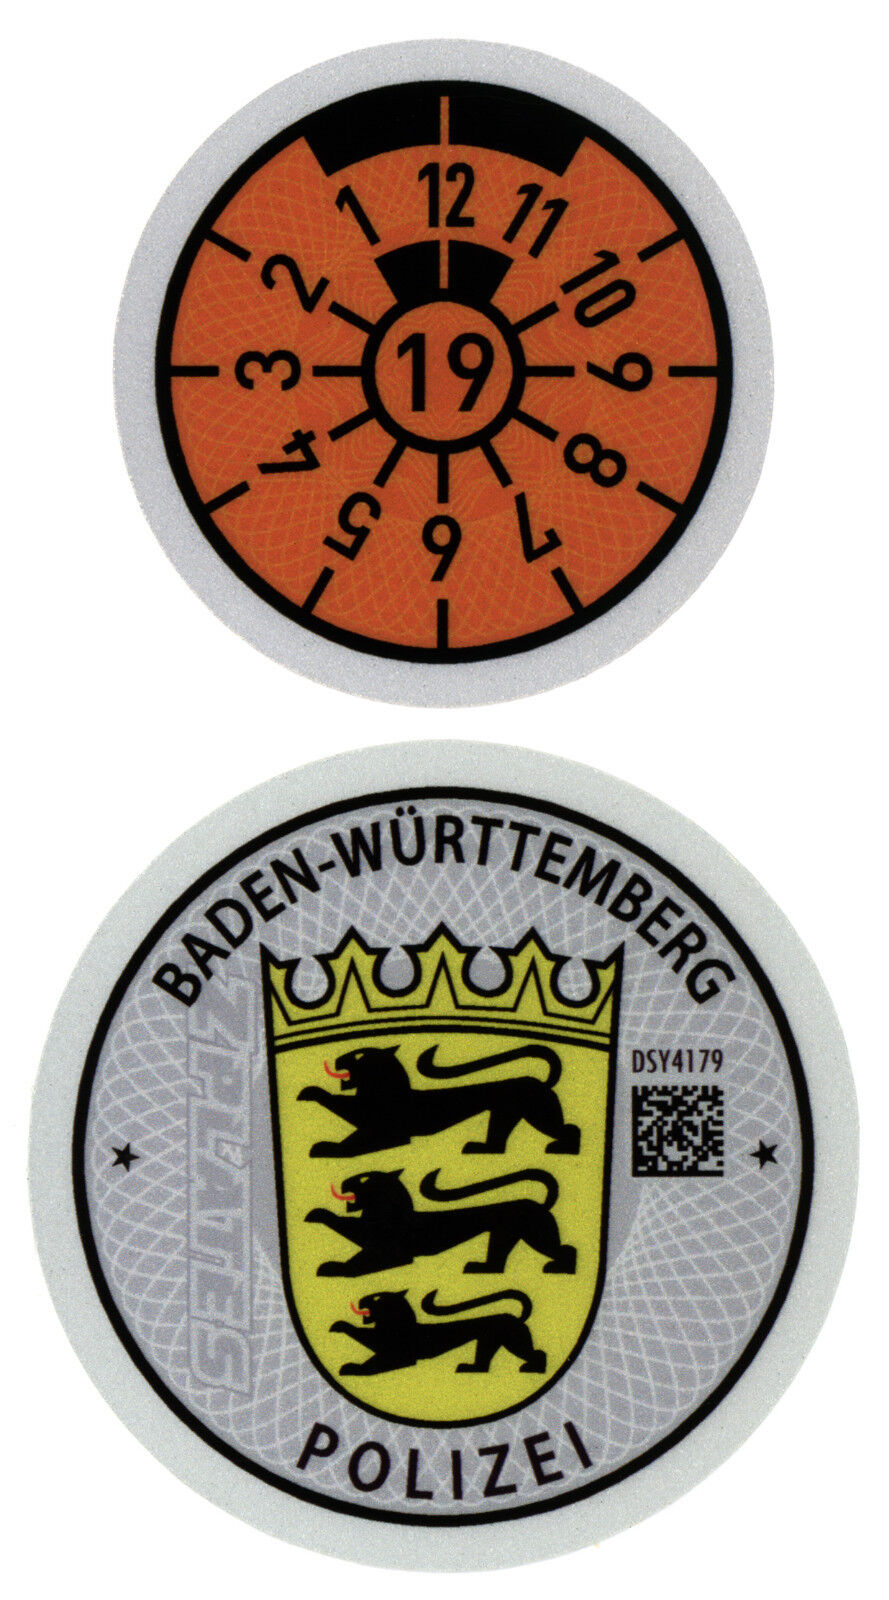 German Police License Plate Registration Seal and Inspection Sticker